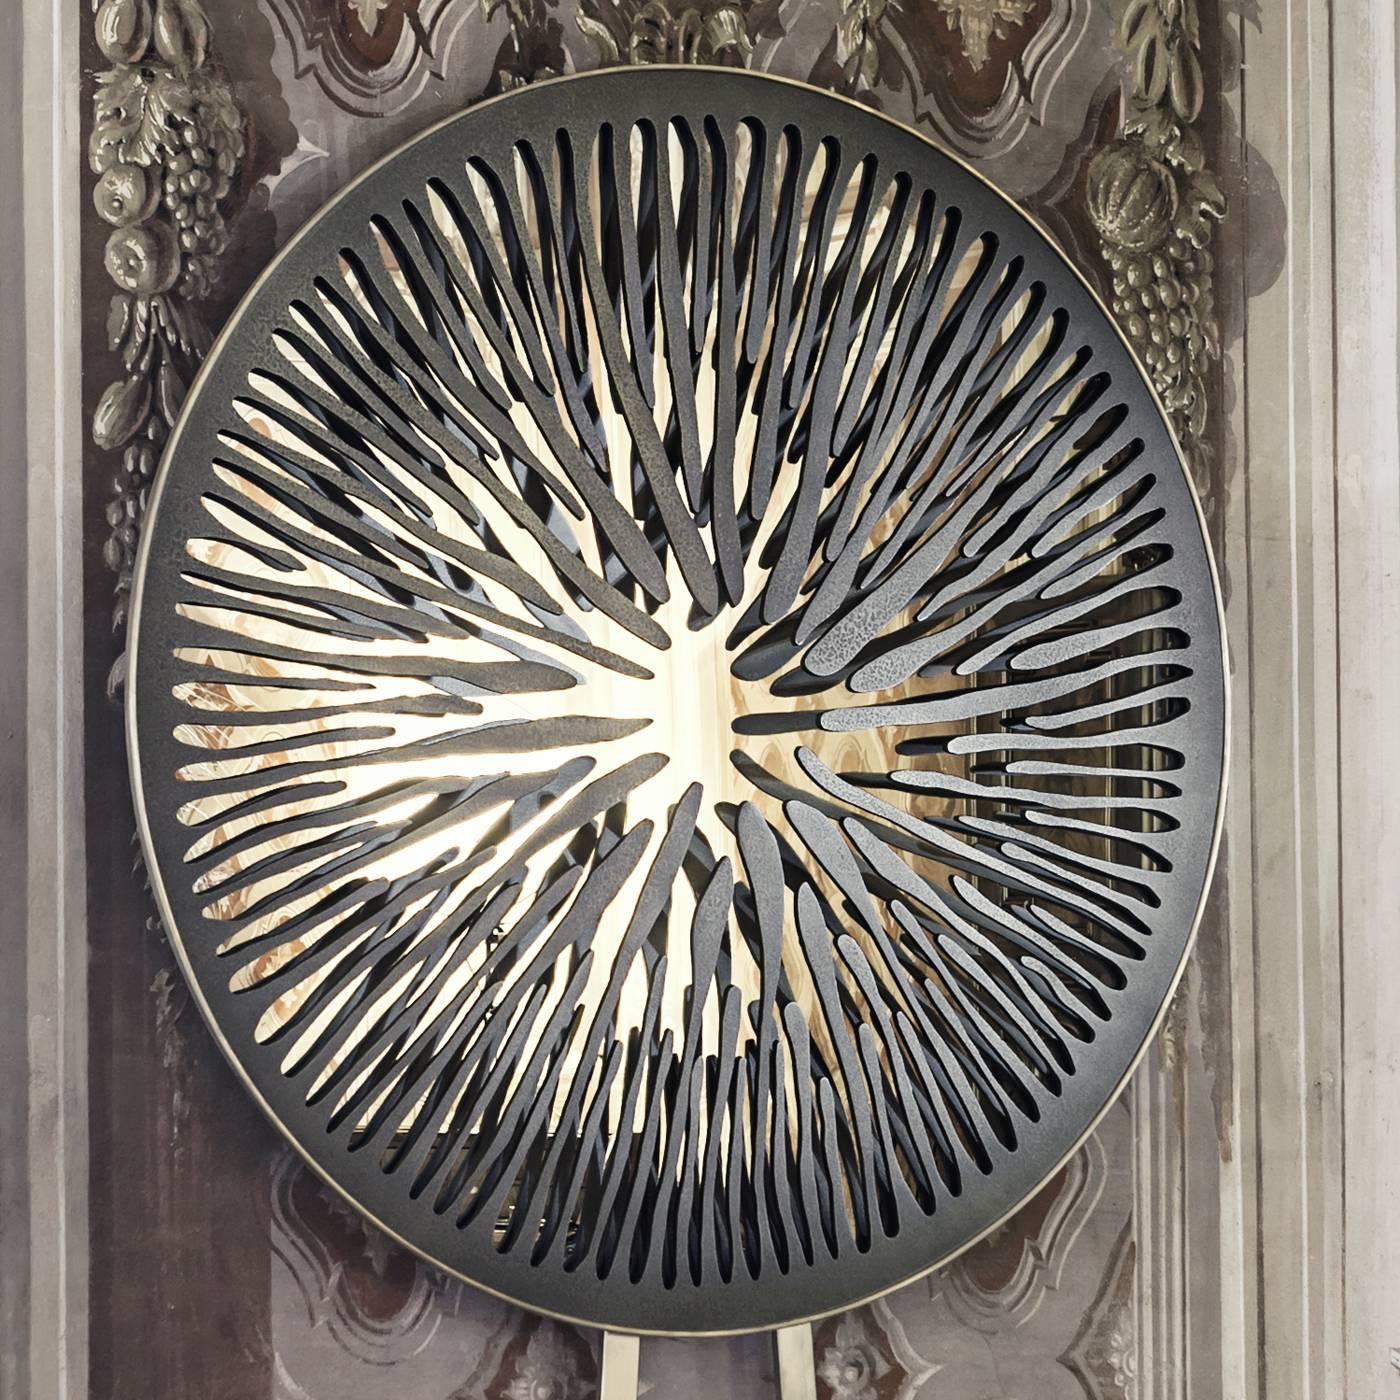 This ornate sculptural mirror's design was inspired by the pupil of an eye. The centre of the mirror is crafted in copper-plated aluminium with a dark green coating. The boarder is in wax coated brass with a bronze finish. This piece is the sole